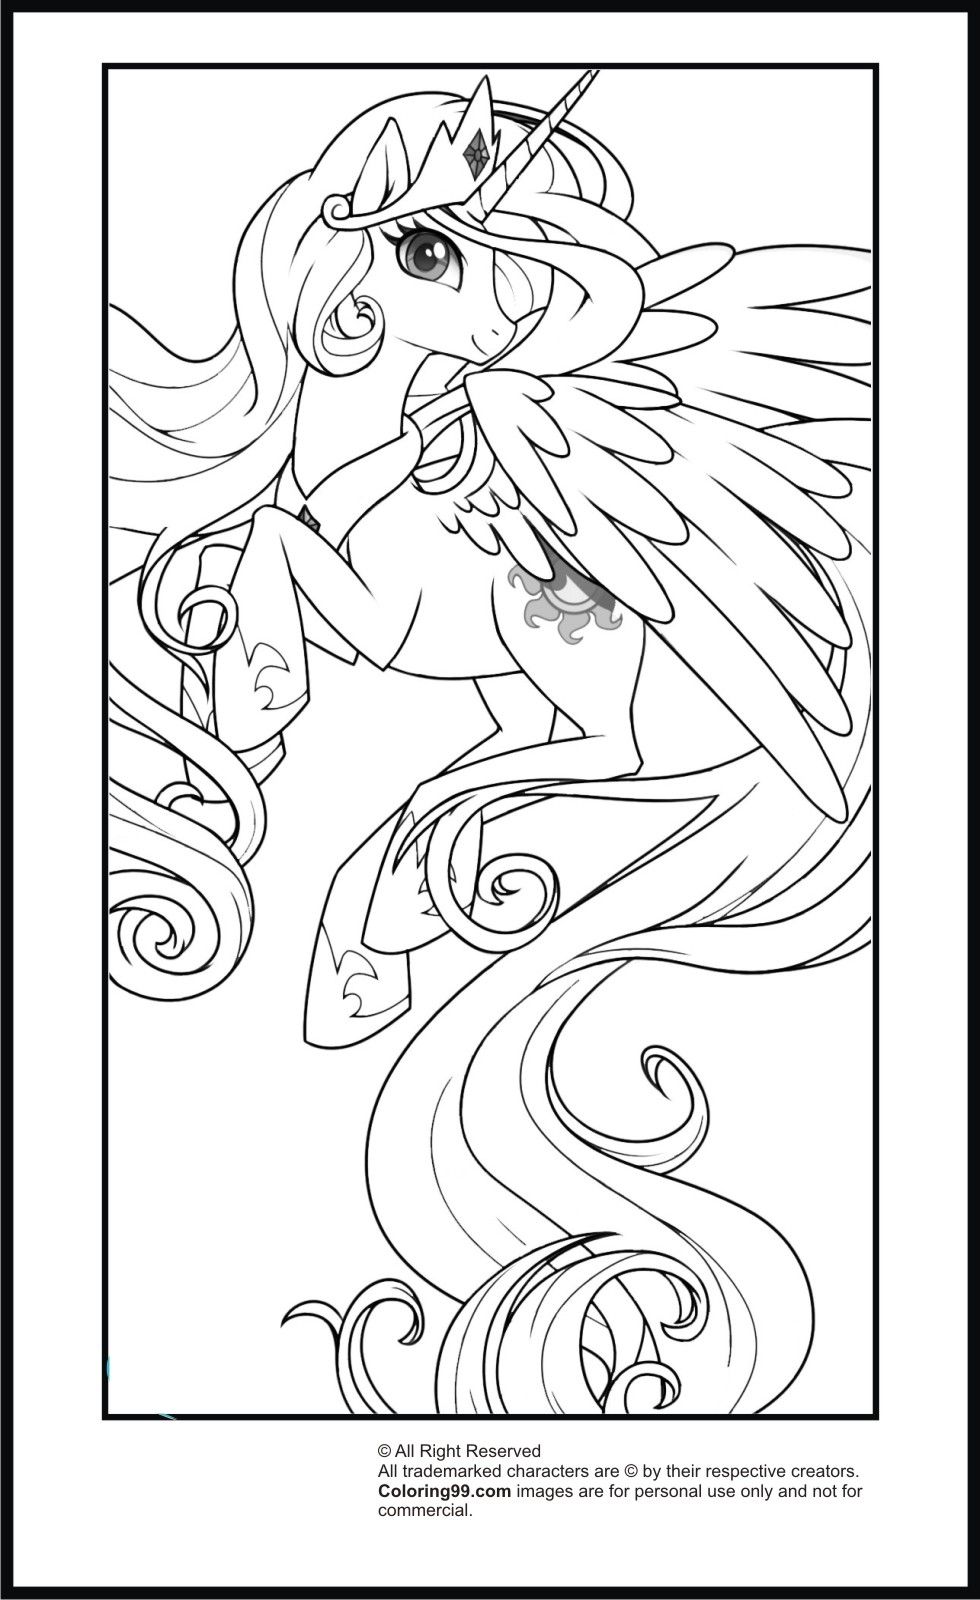  Celestia My Little Pony Coloring Pages - My Little Pony